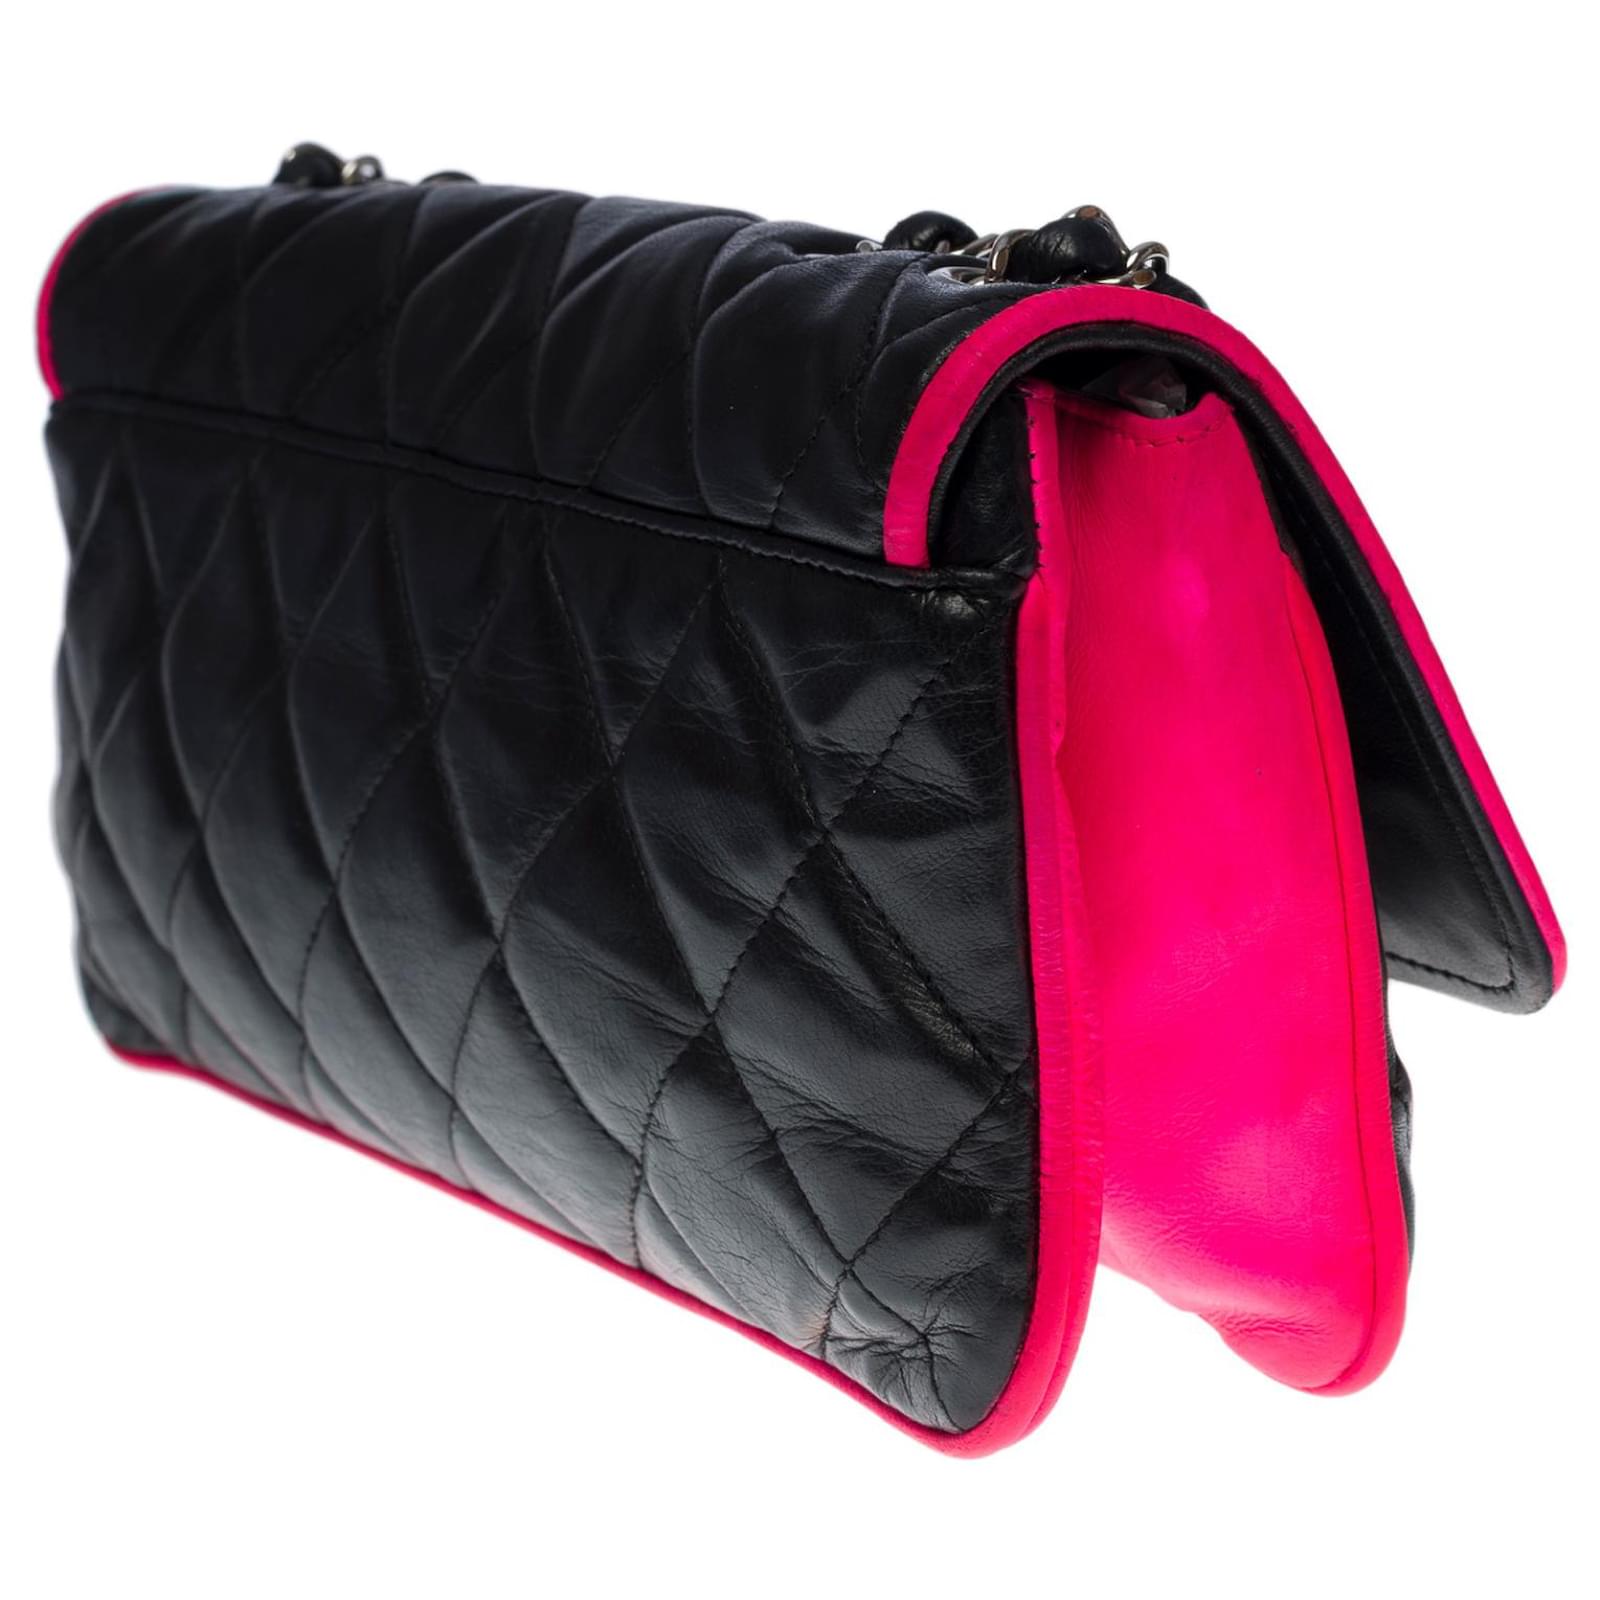 Chanel Black and Neon Pink Two Tone Quilted Flap Bag Chanel